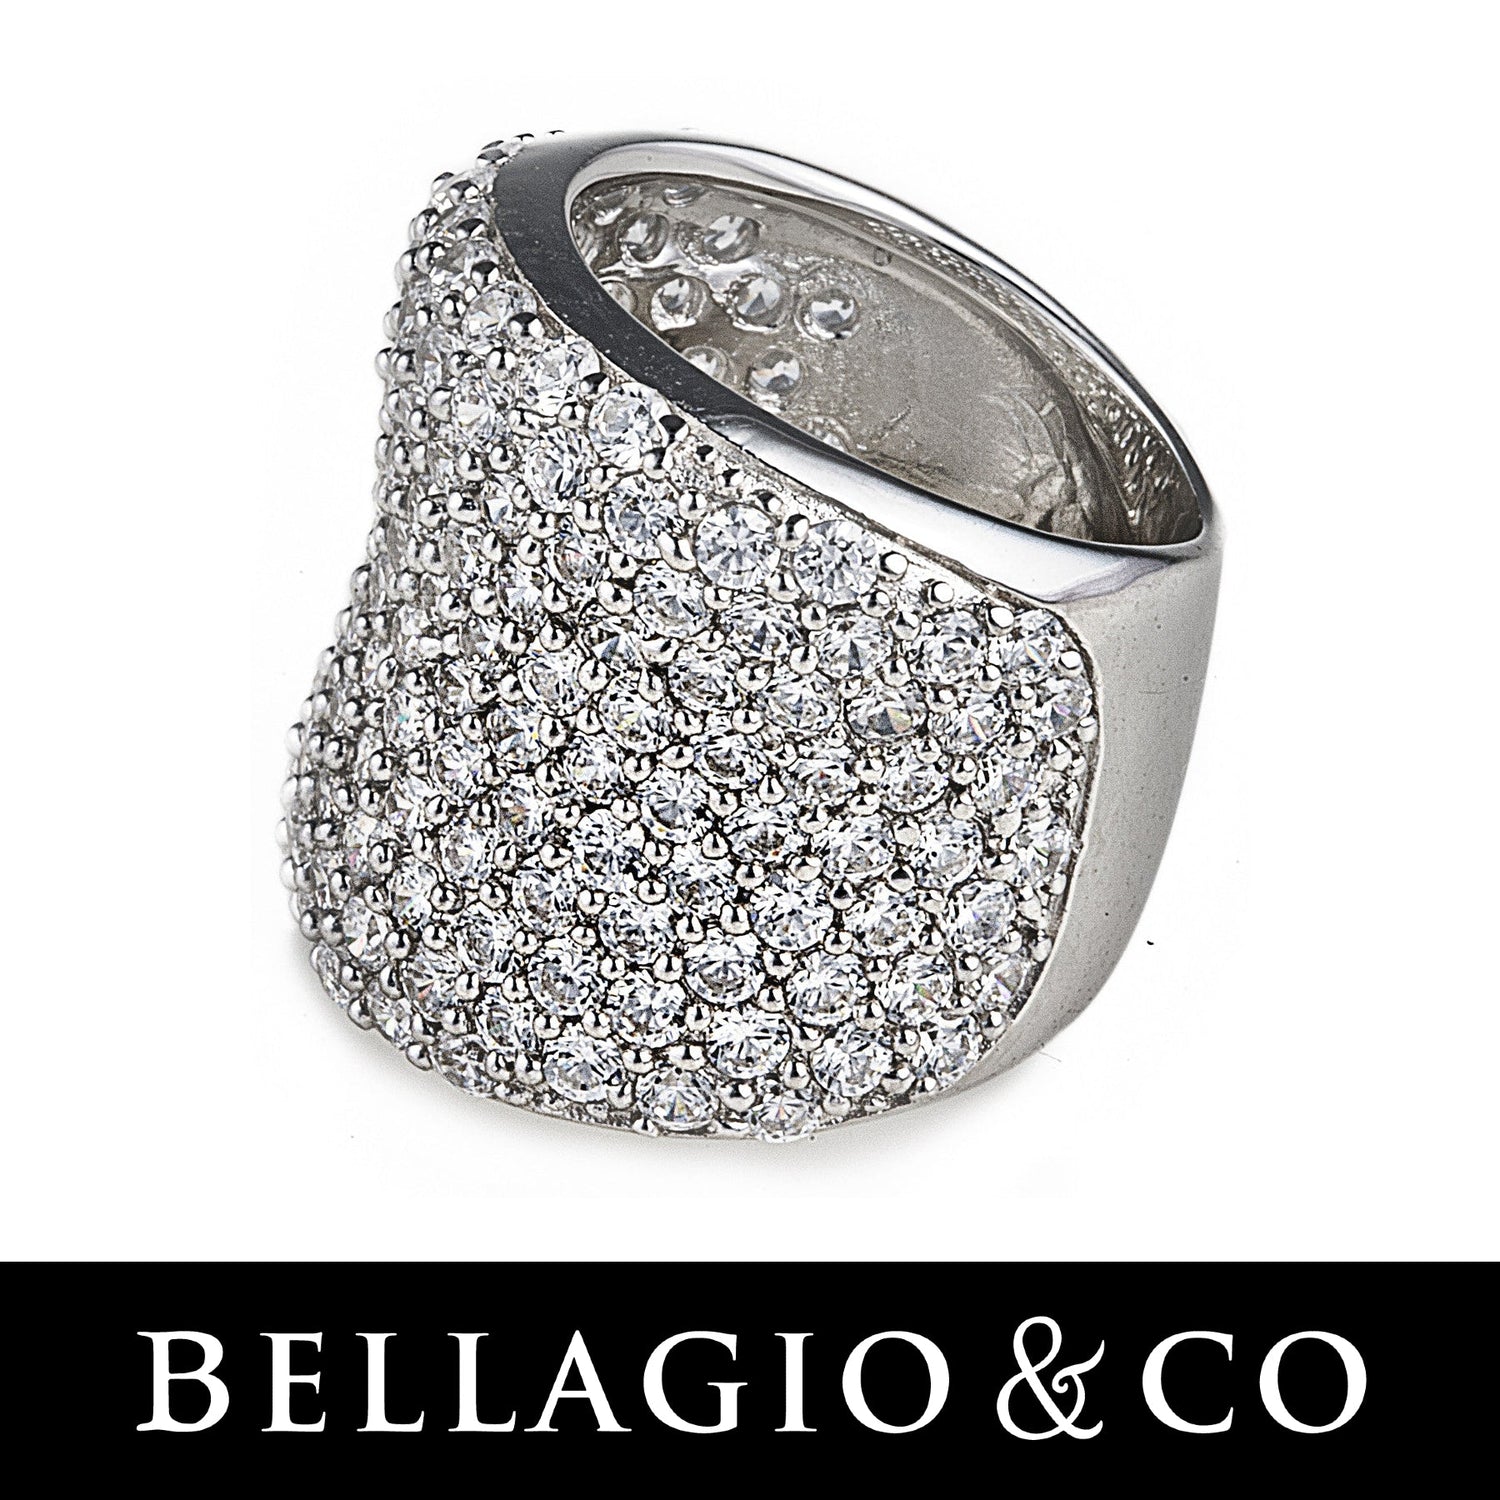 Shop 925 sterling silver jewellery with a pavé setting by Bellagio & Co.